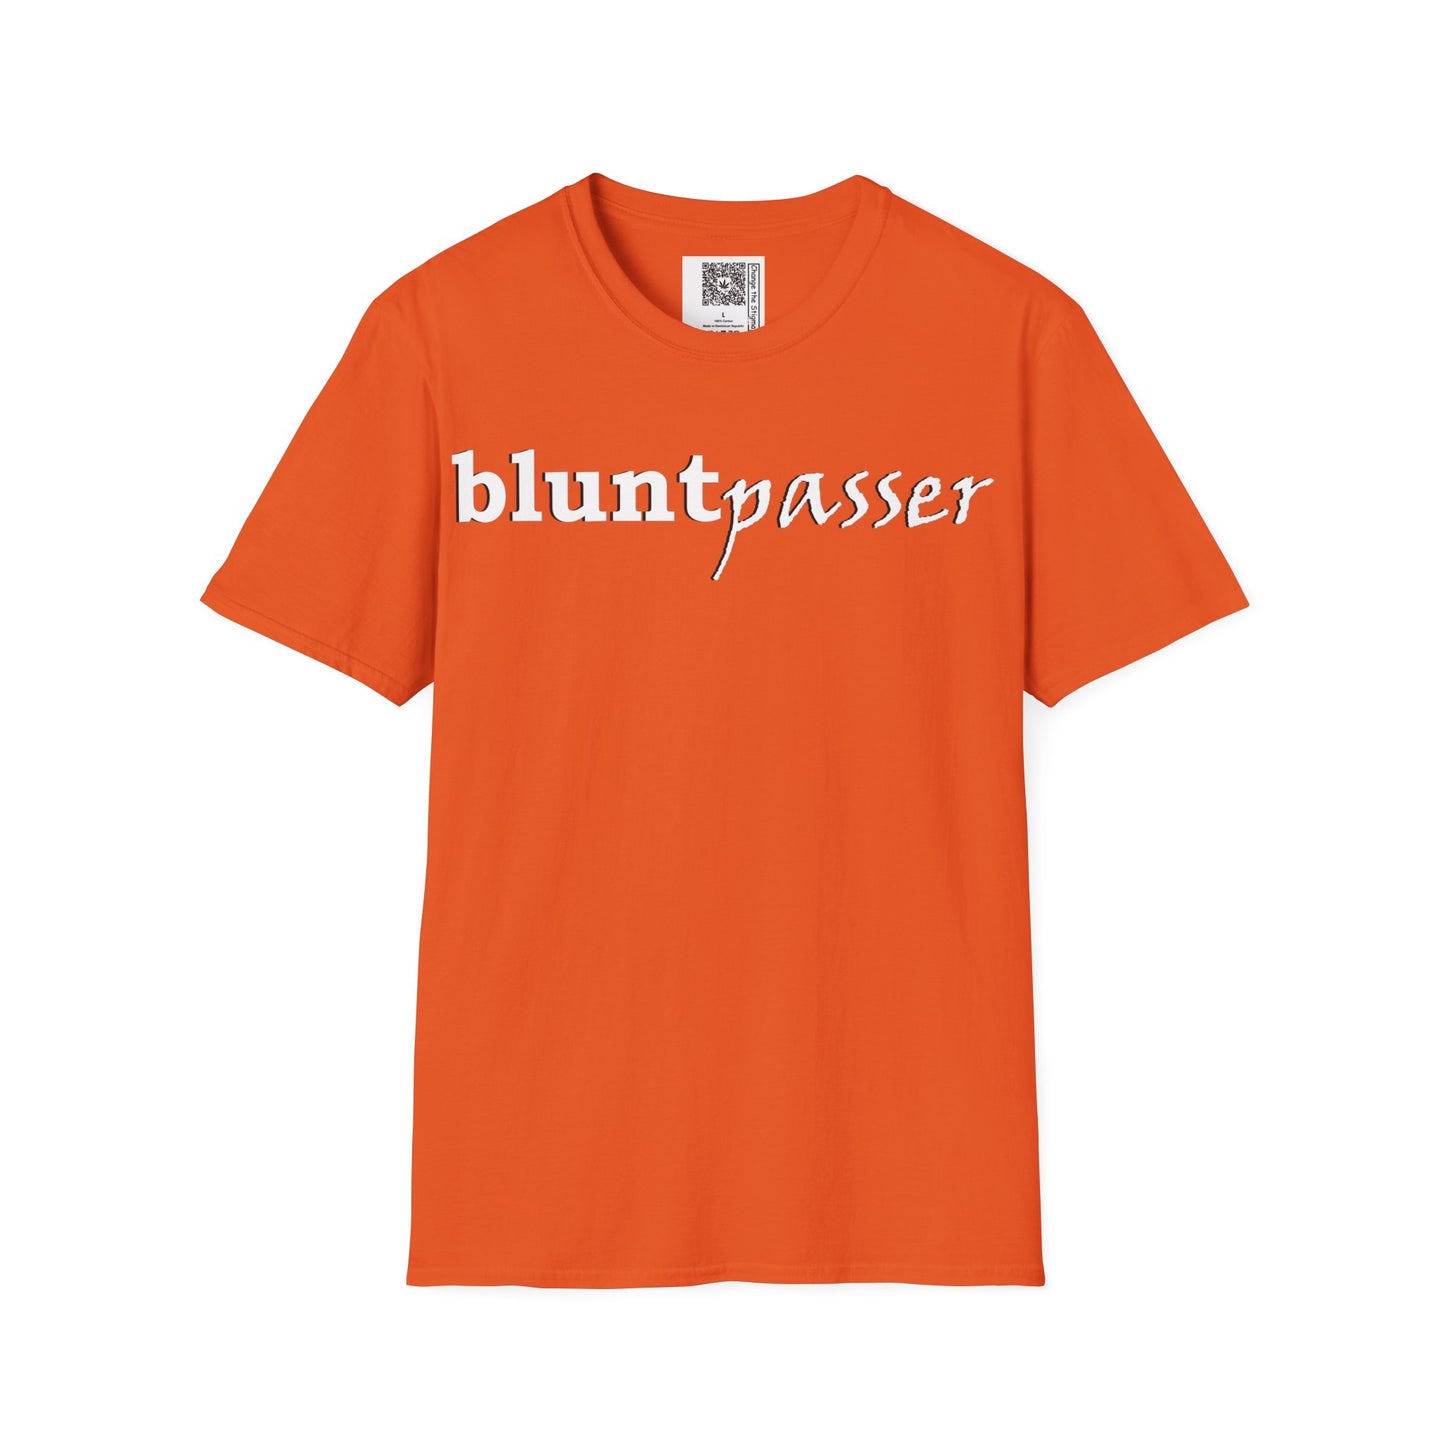 Change the Stigma, Orange color, shirt saying "blunt passer", Shirt is open displayed, Qr code is shown neck tag